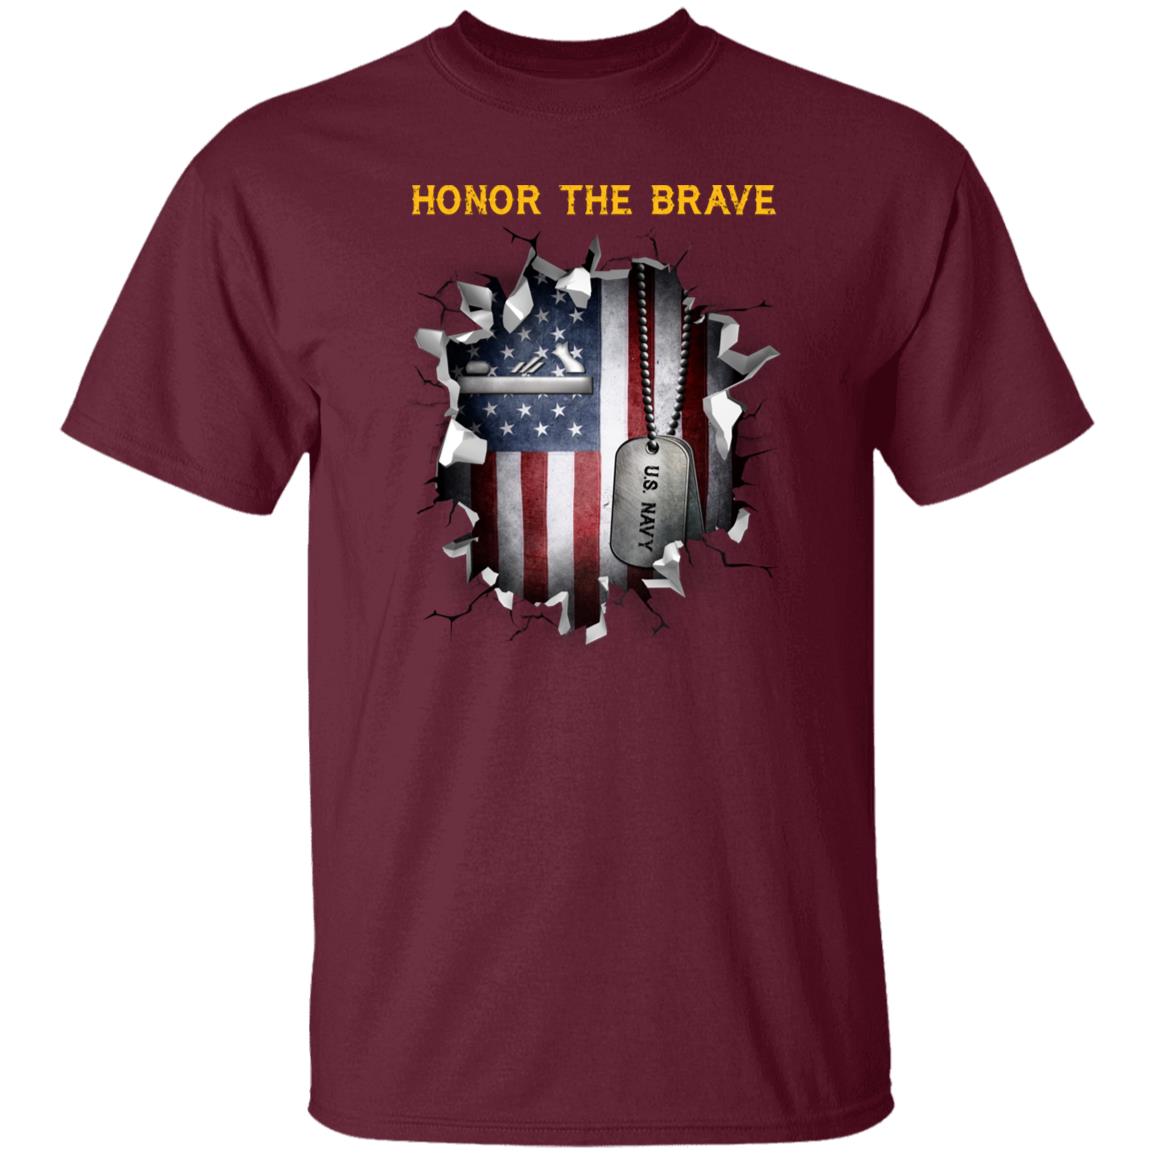 Navy Patternmaker Navy PM - Honor The Brave Front Shirt